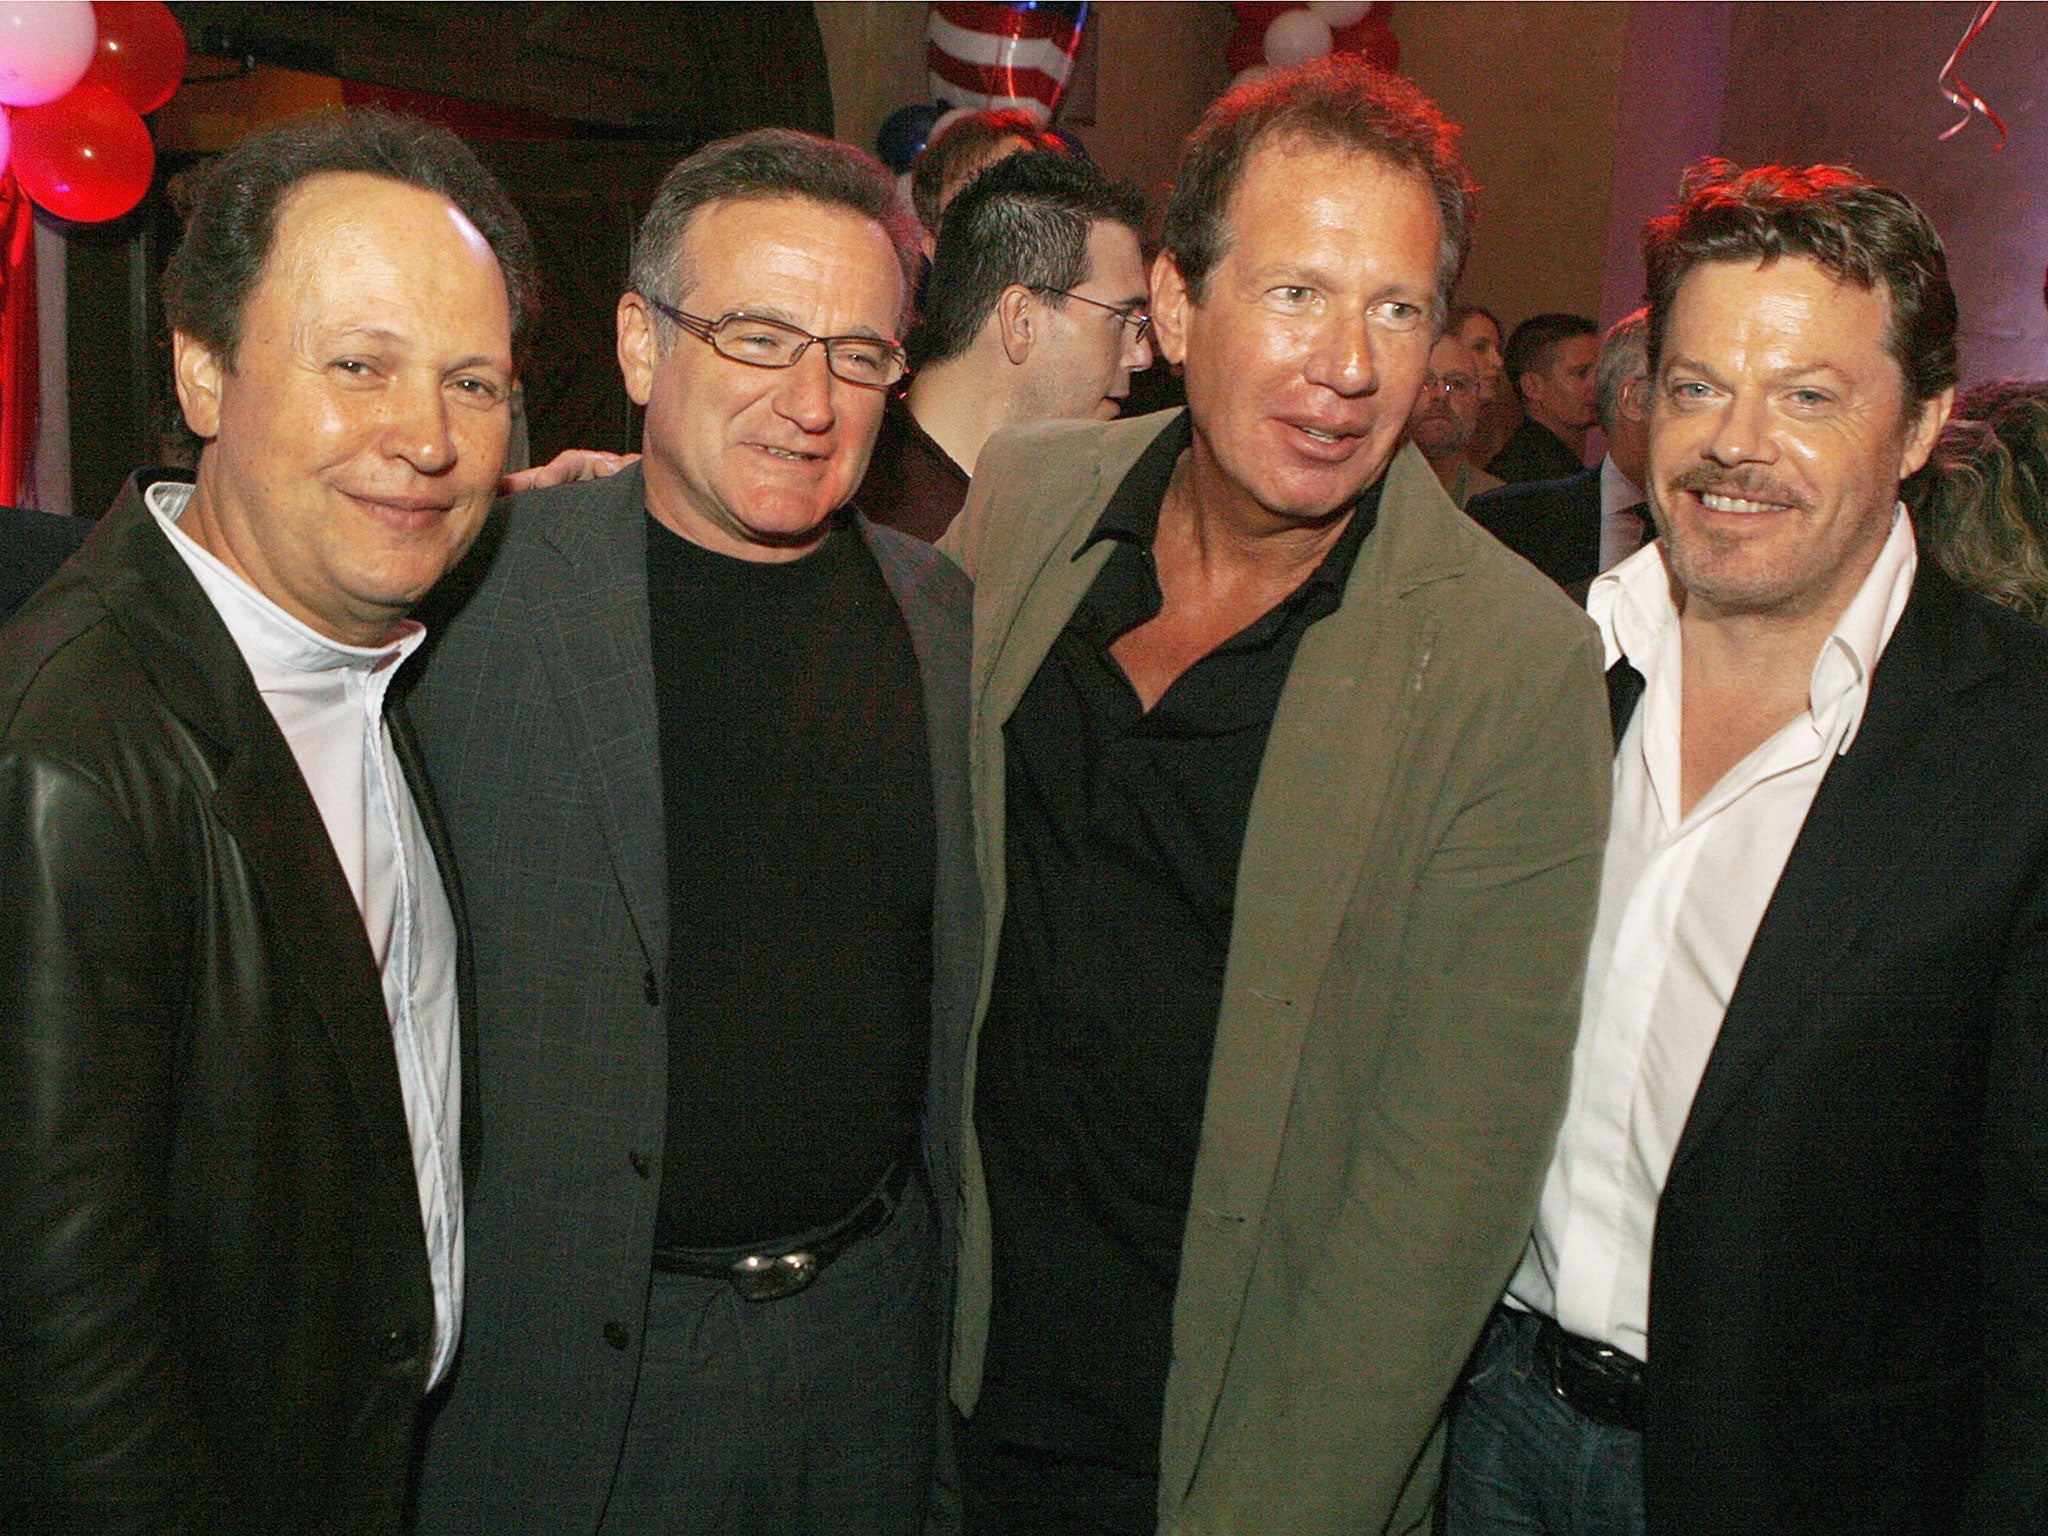 Actors Billy Crystal (L), Robin Williams, Garry Shandling and Eddie Izzard on October 4, 2006 in Los Angeles, California.